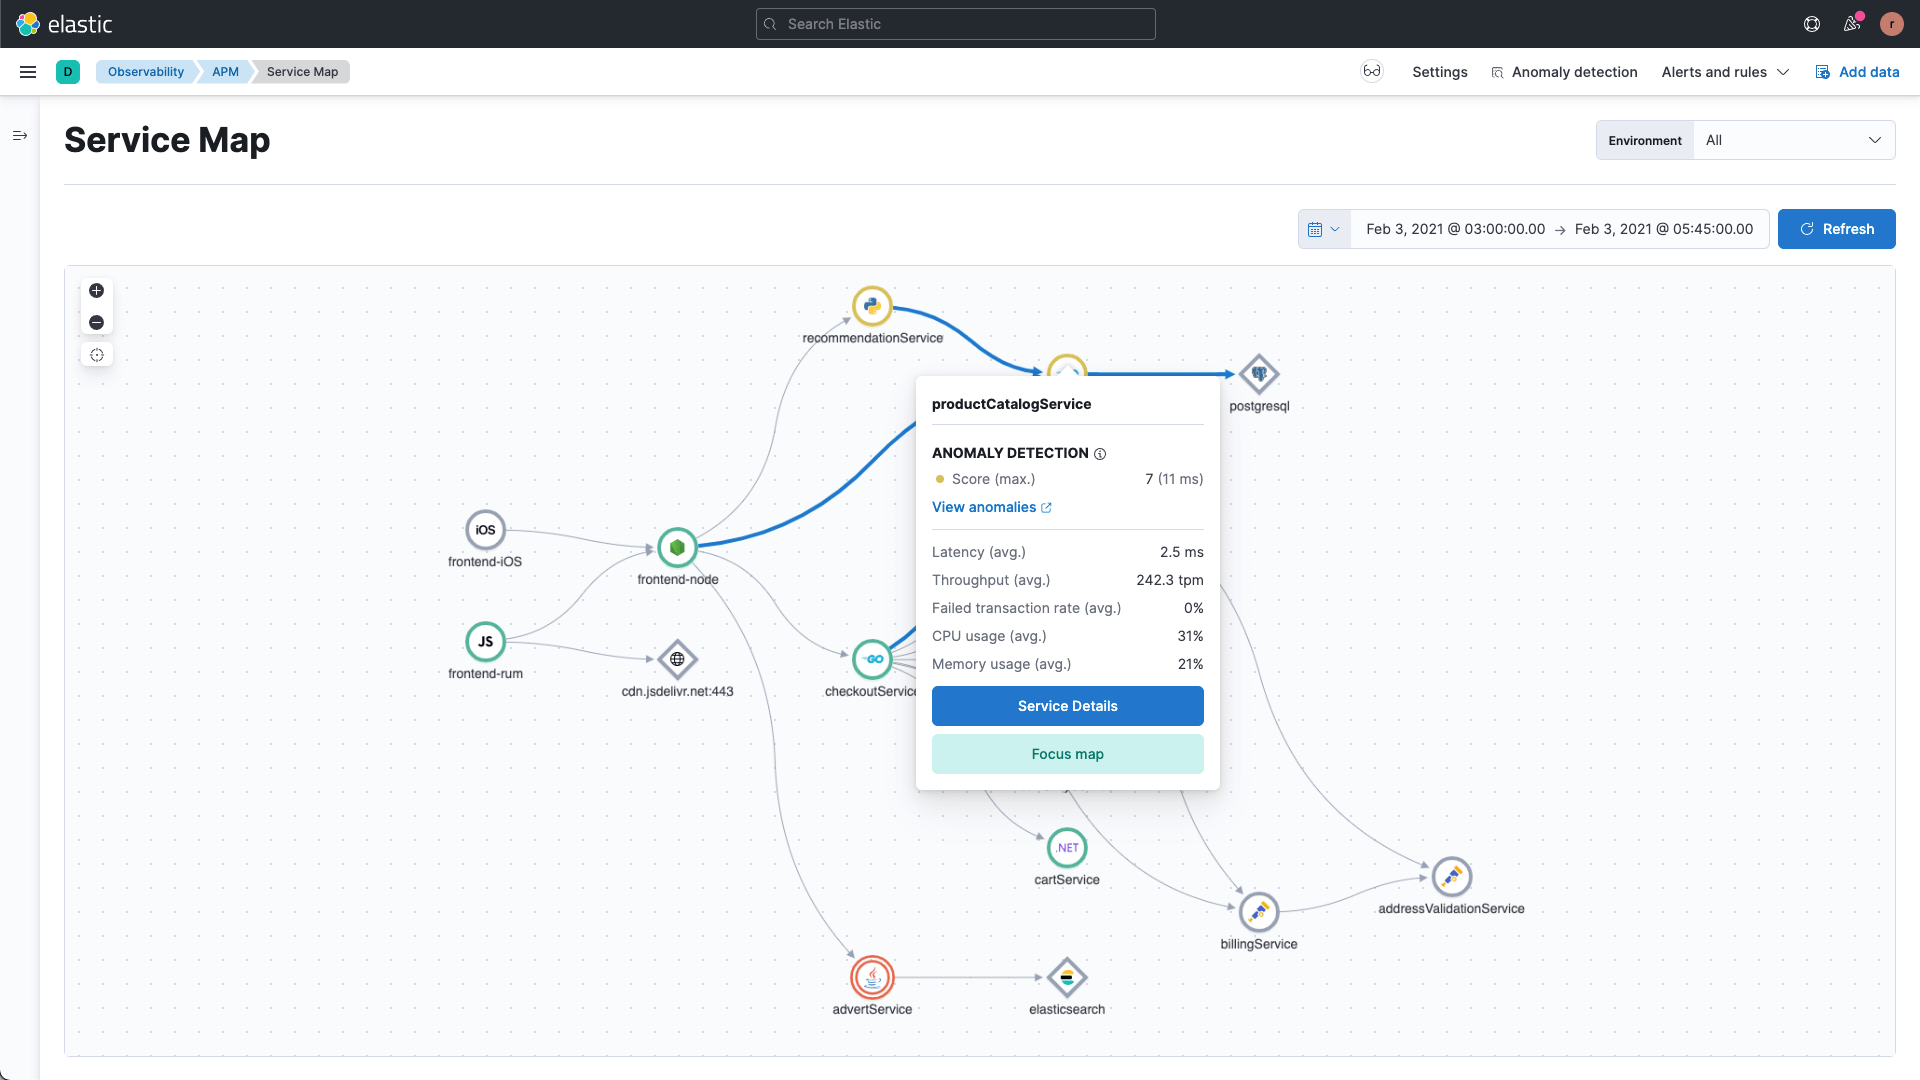 Observability service map, for monitoring application data with Elastic